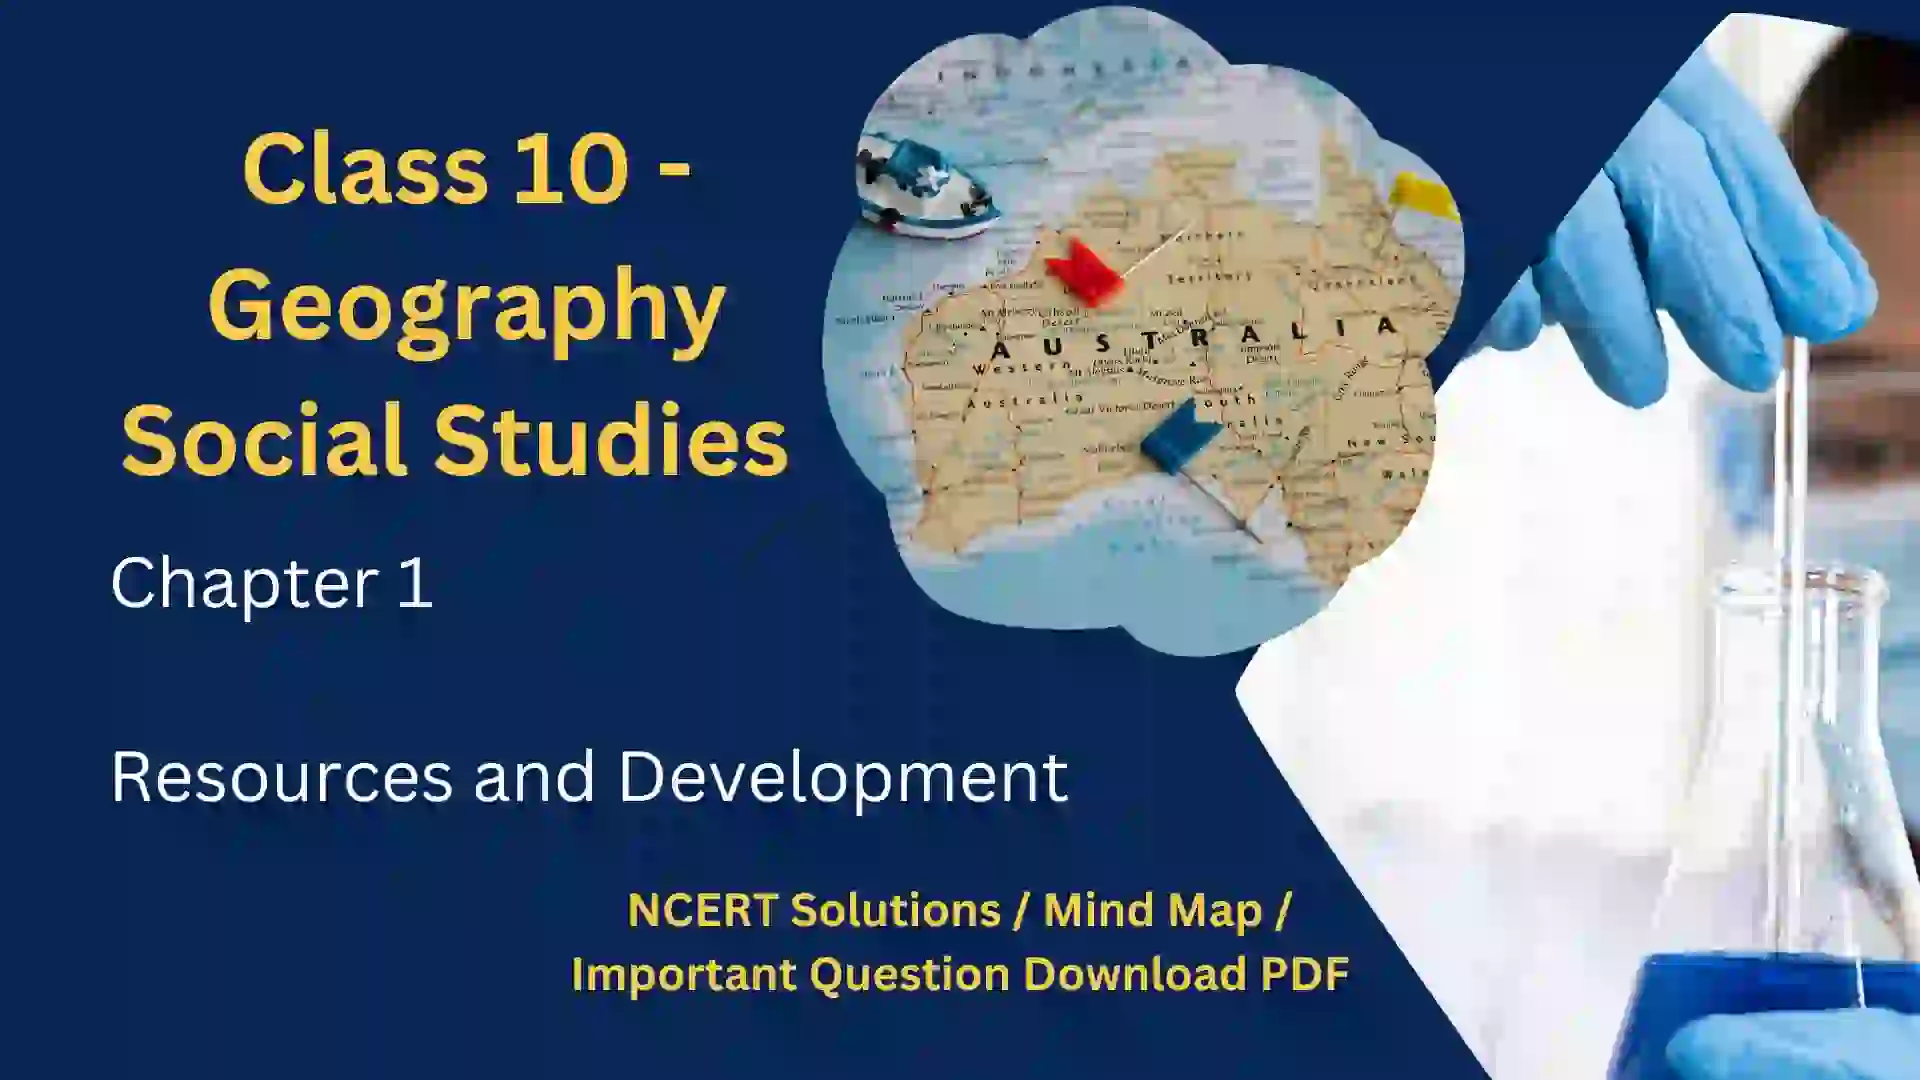 Class 10 Social Studies Geography Chapter 1 Resources and Development